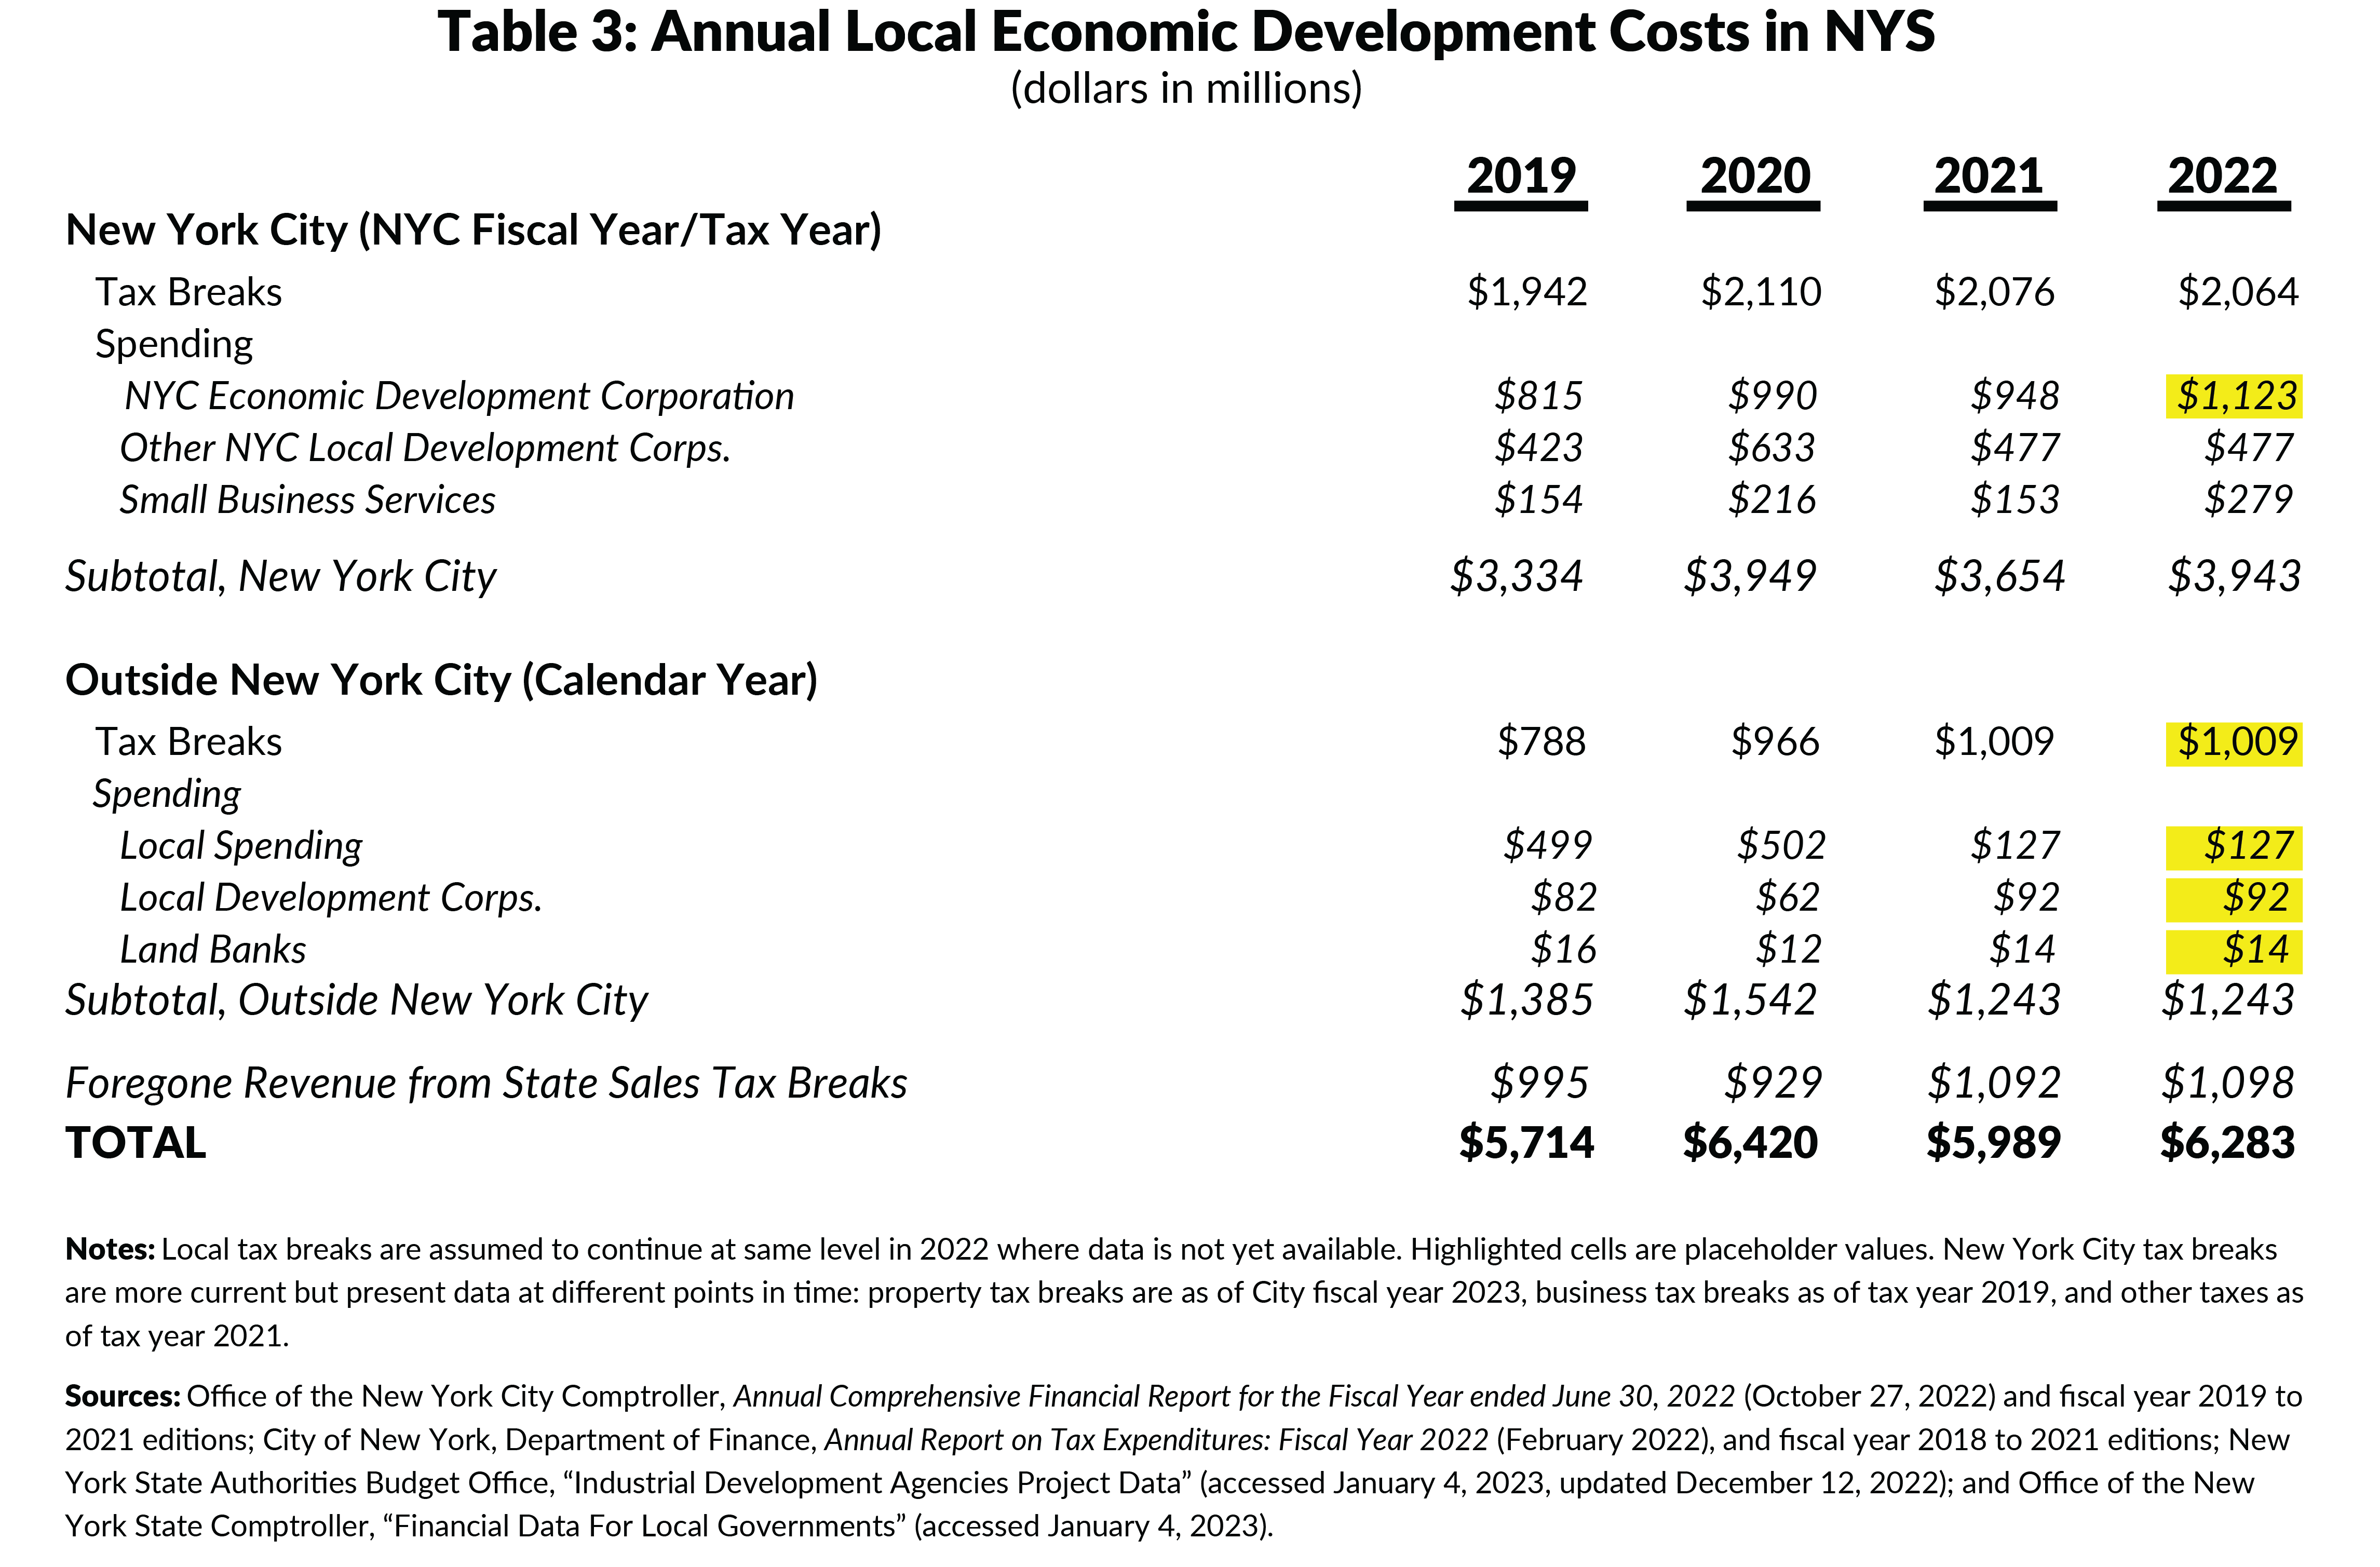 Table 3: Annual Local Economic Development Costs in NYS, dollars in millions 